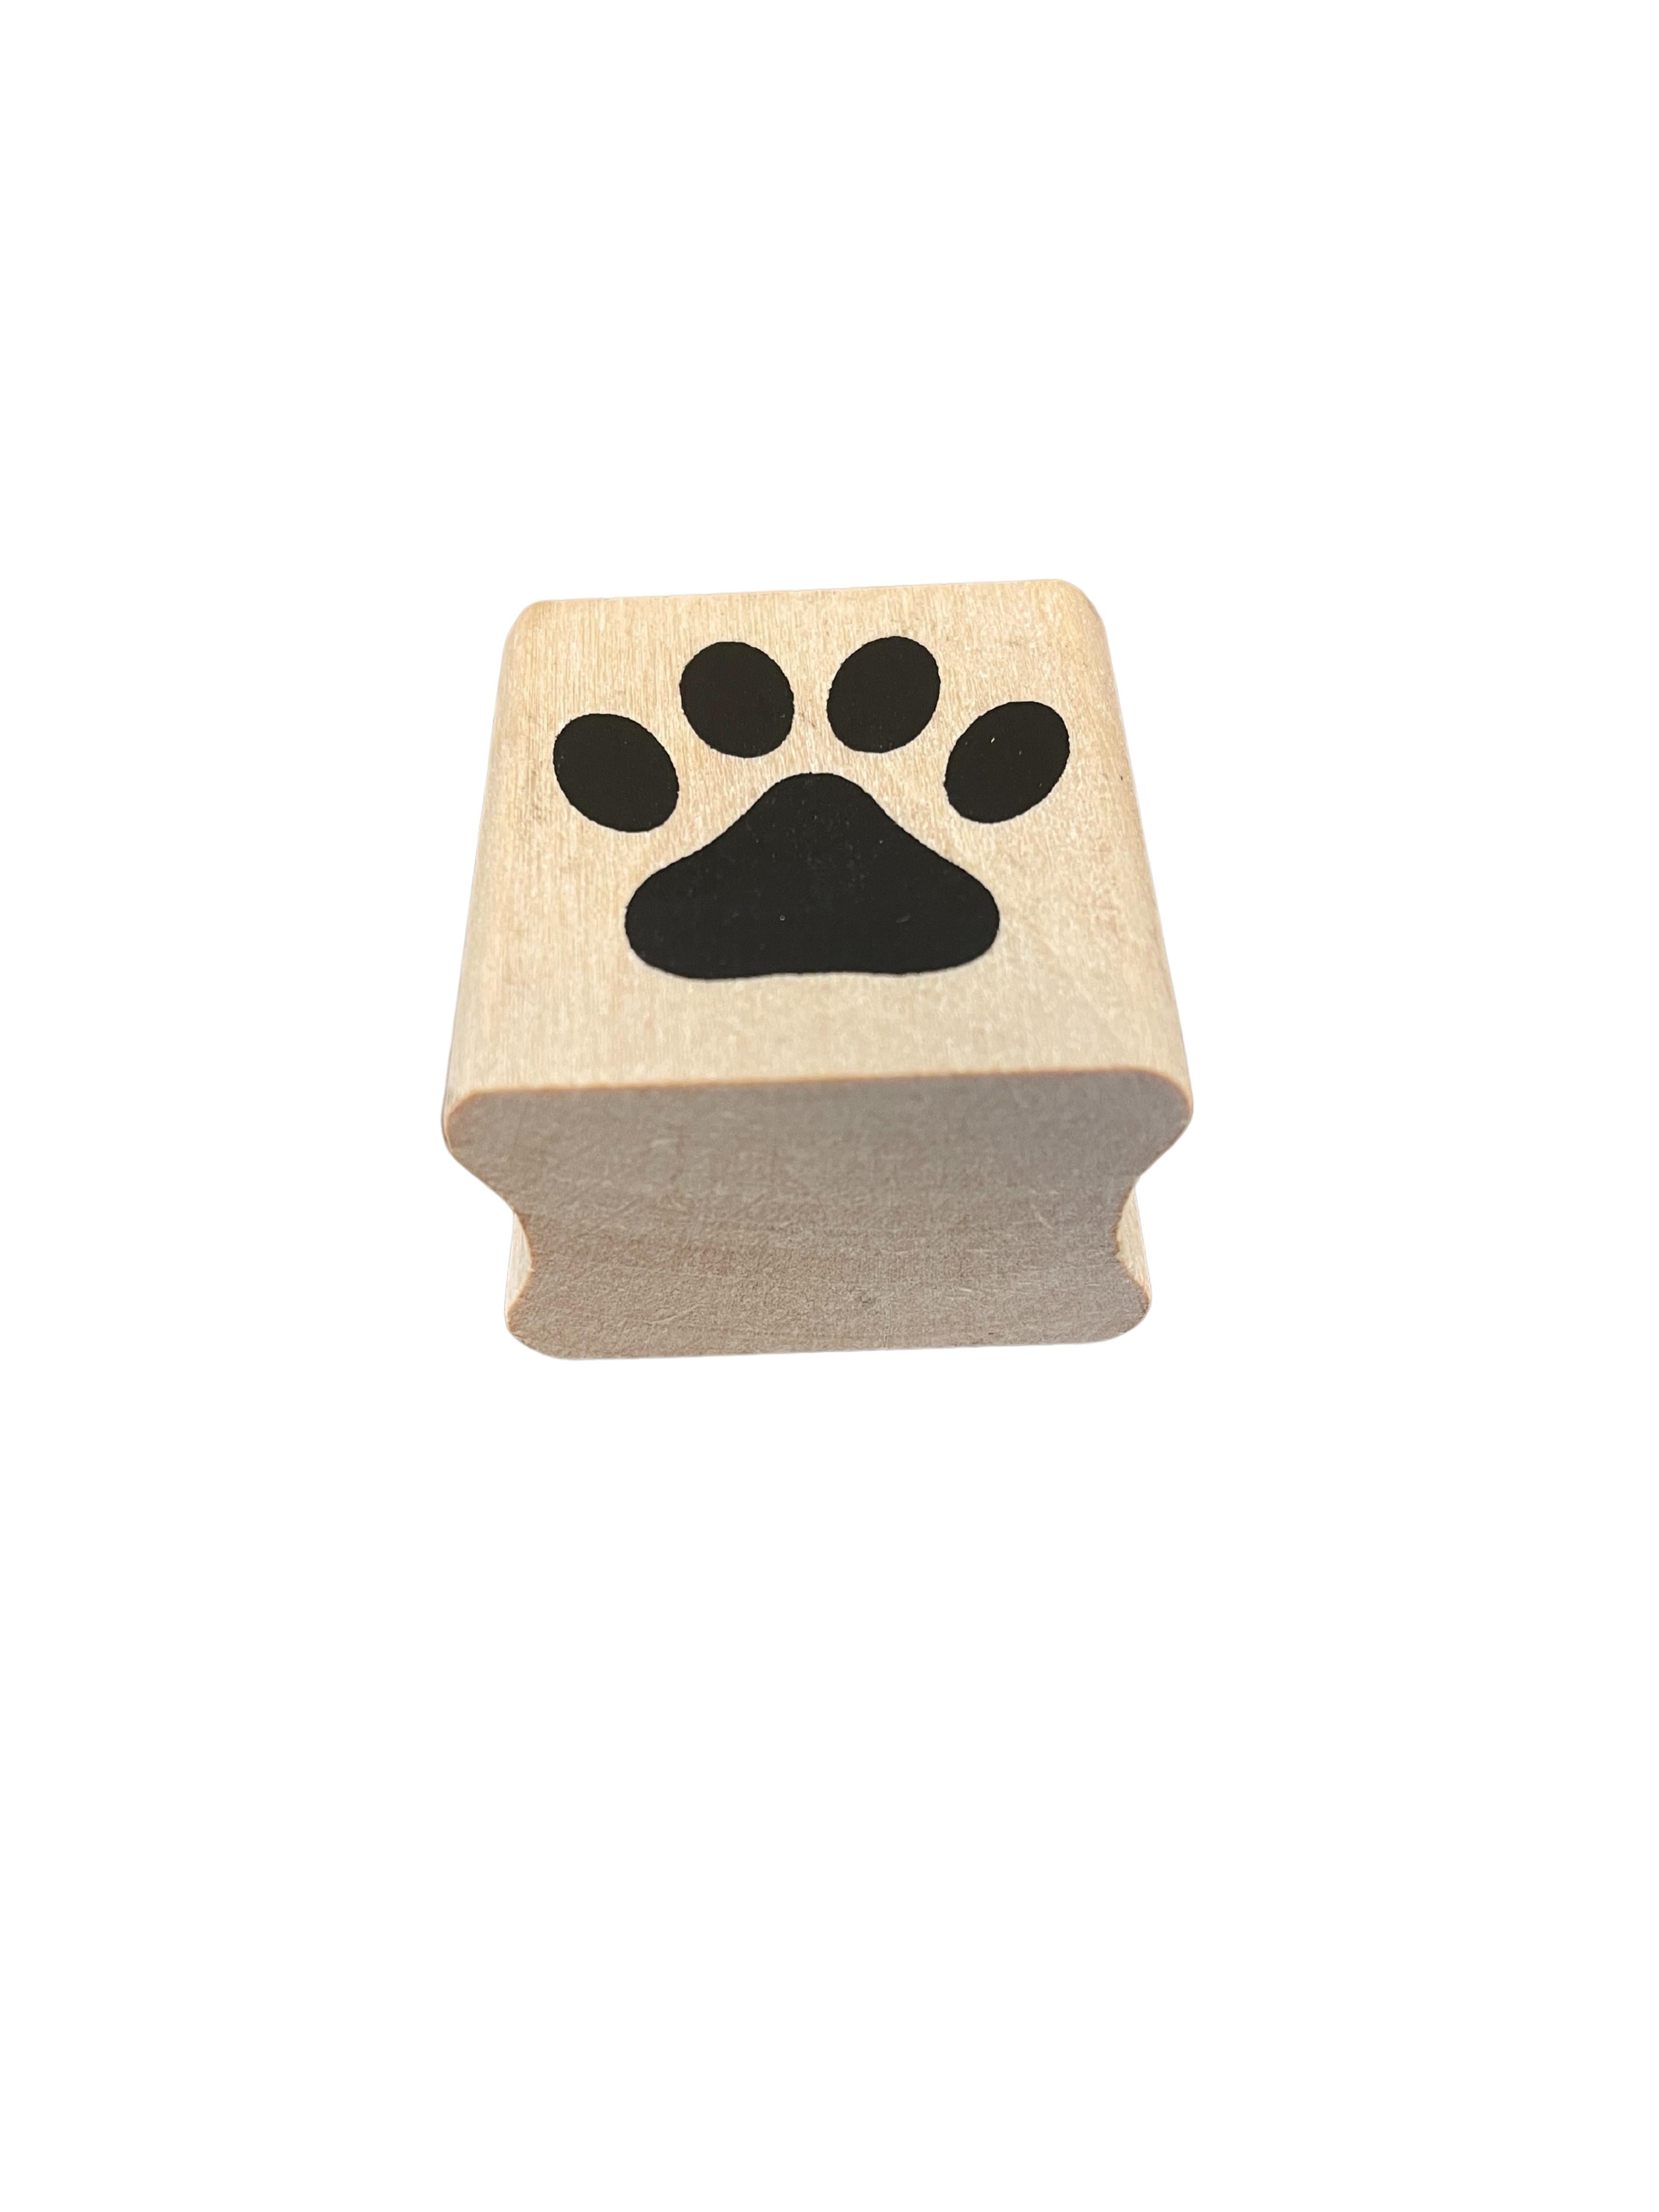 Paw Print Rubber Stamp on Wood Block for Stamping Crafting Scrapbooking 1  inch 